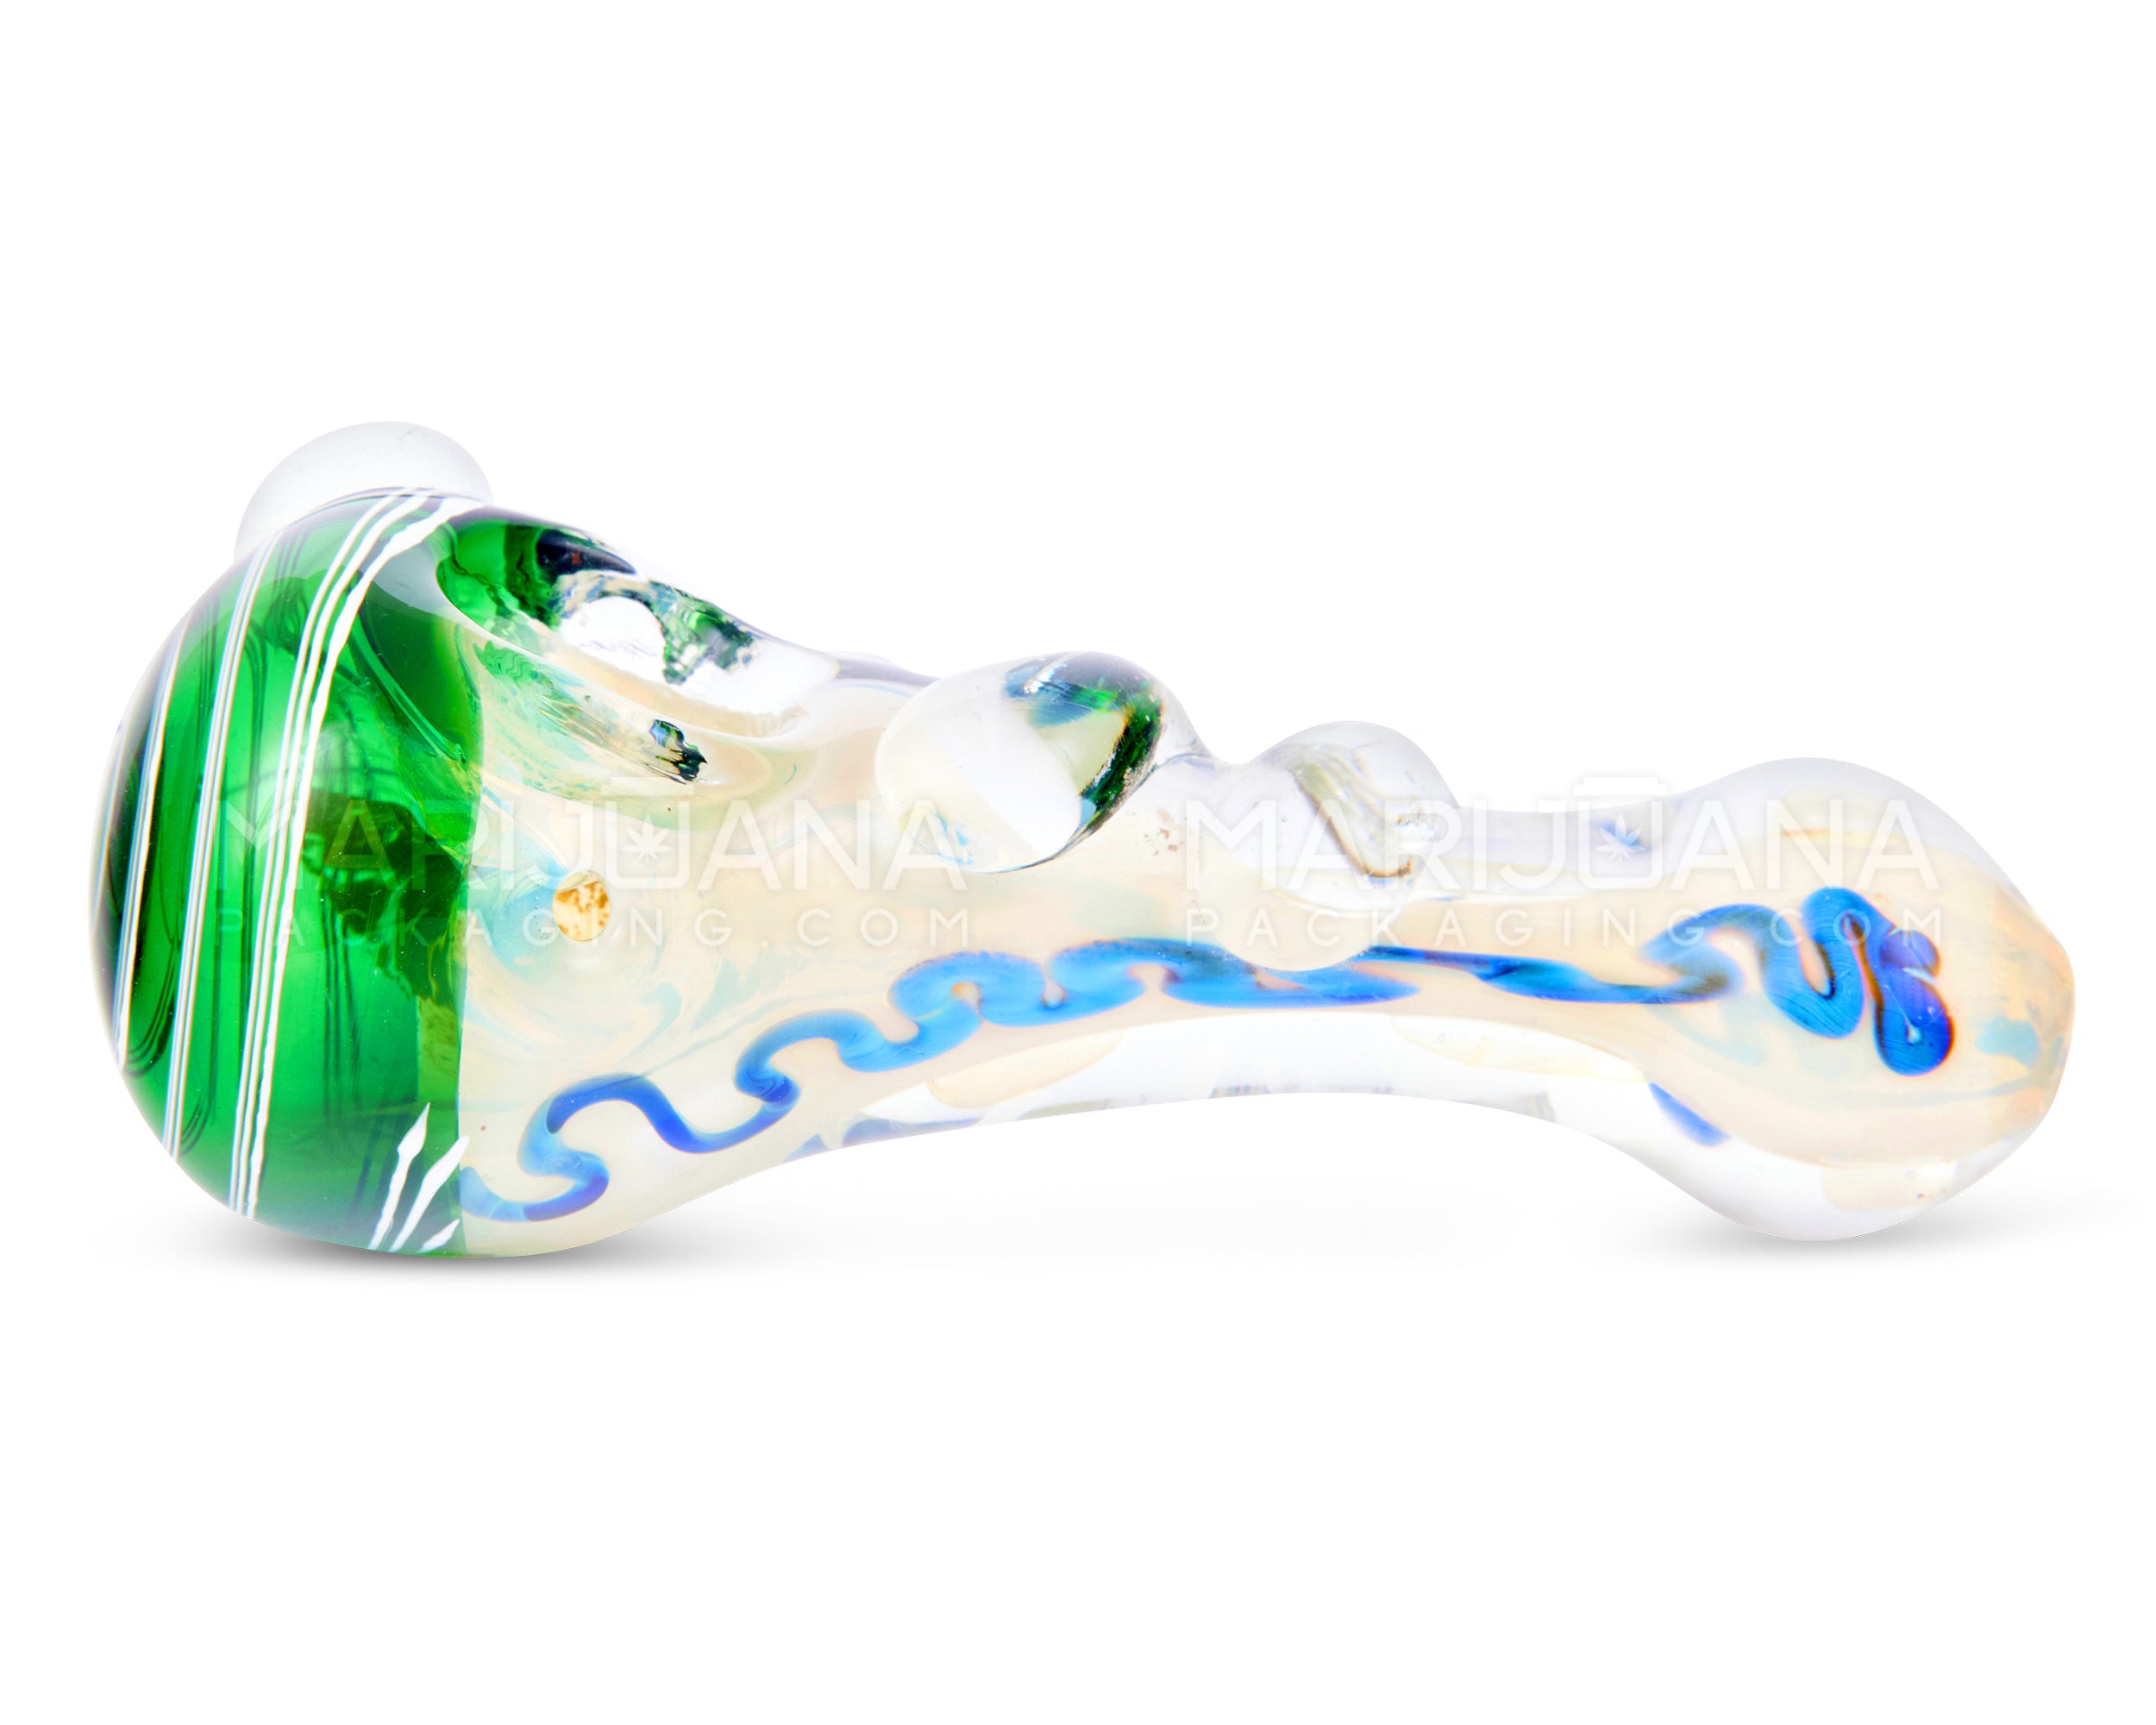 Swirl & Fumed Bulged Spoon Hand Pipe w/ Double Knockers & Spiral Head | 5in Long - Glass - Assorted - 5